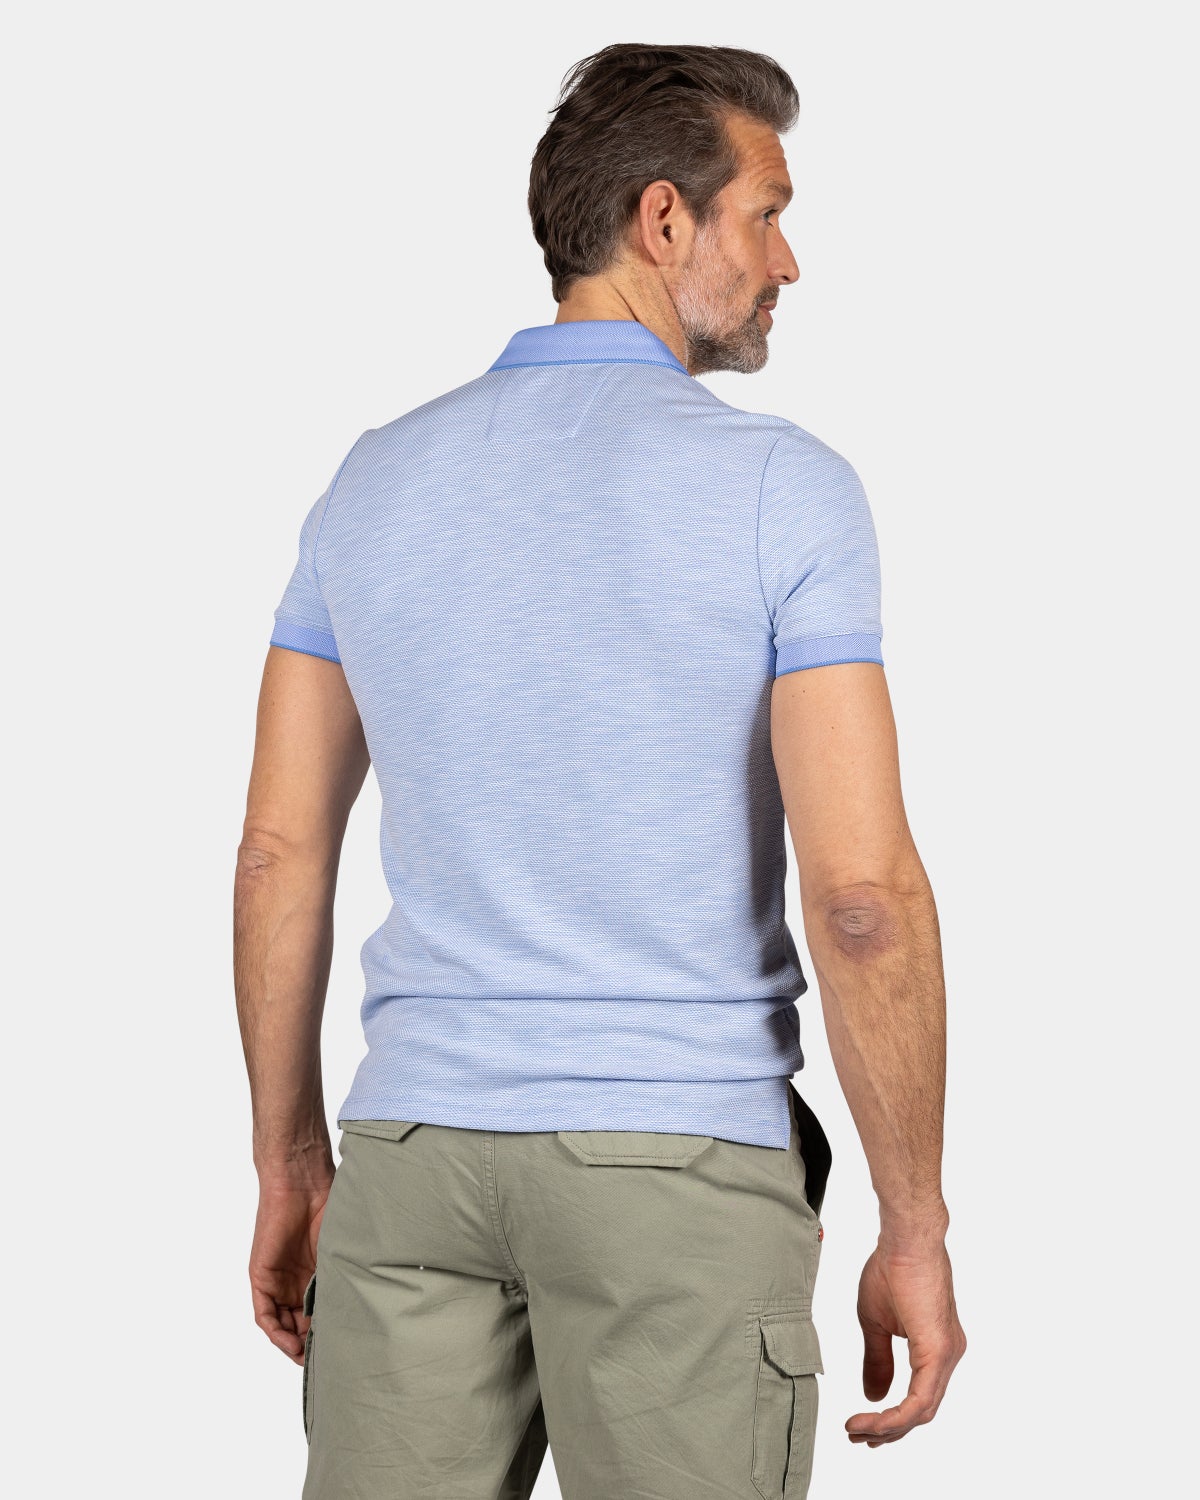 Plain polo made of durable material - Bed Blue